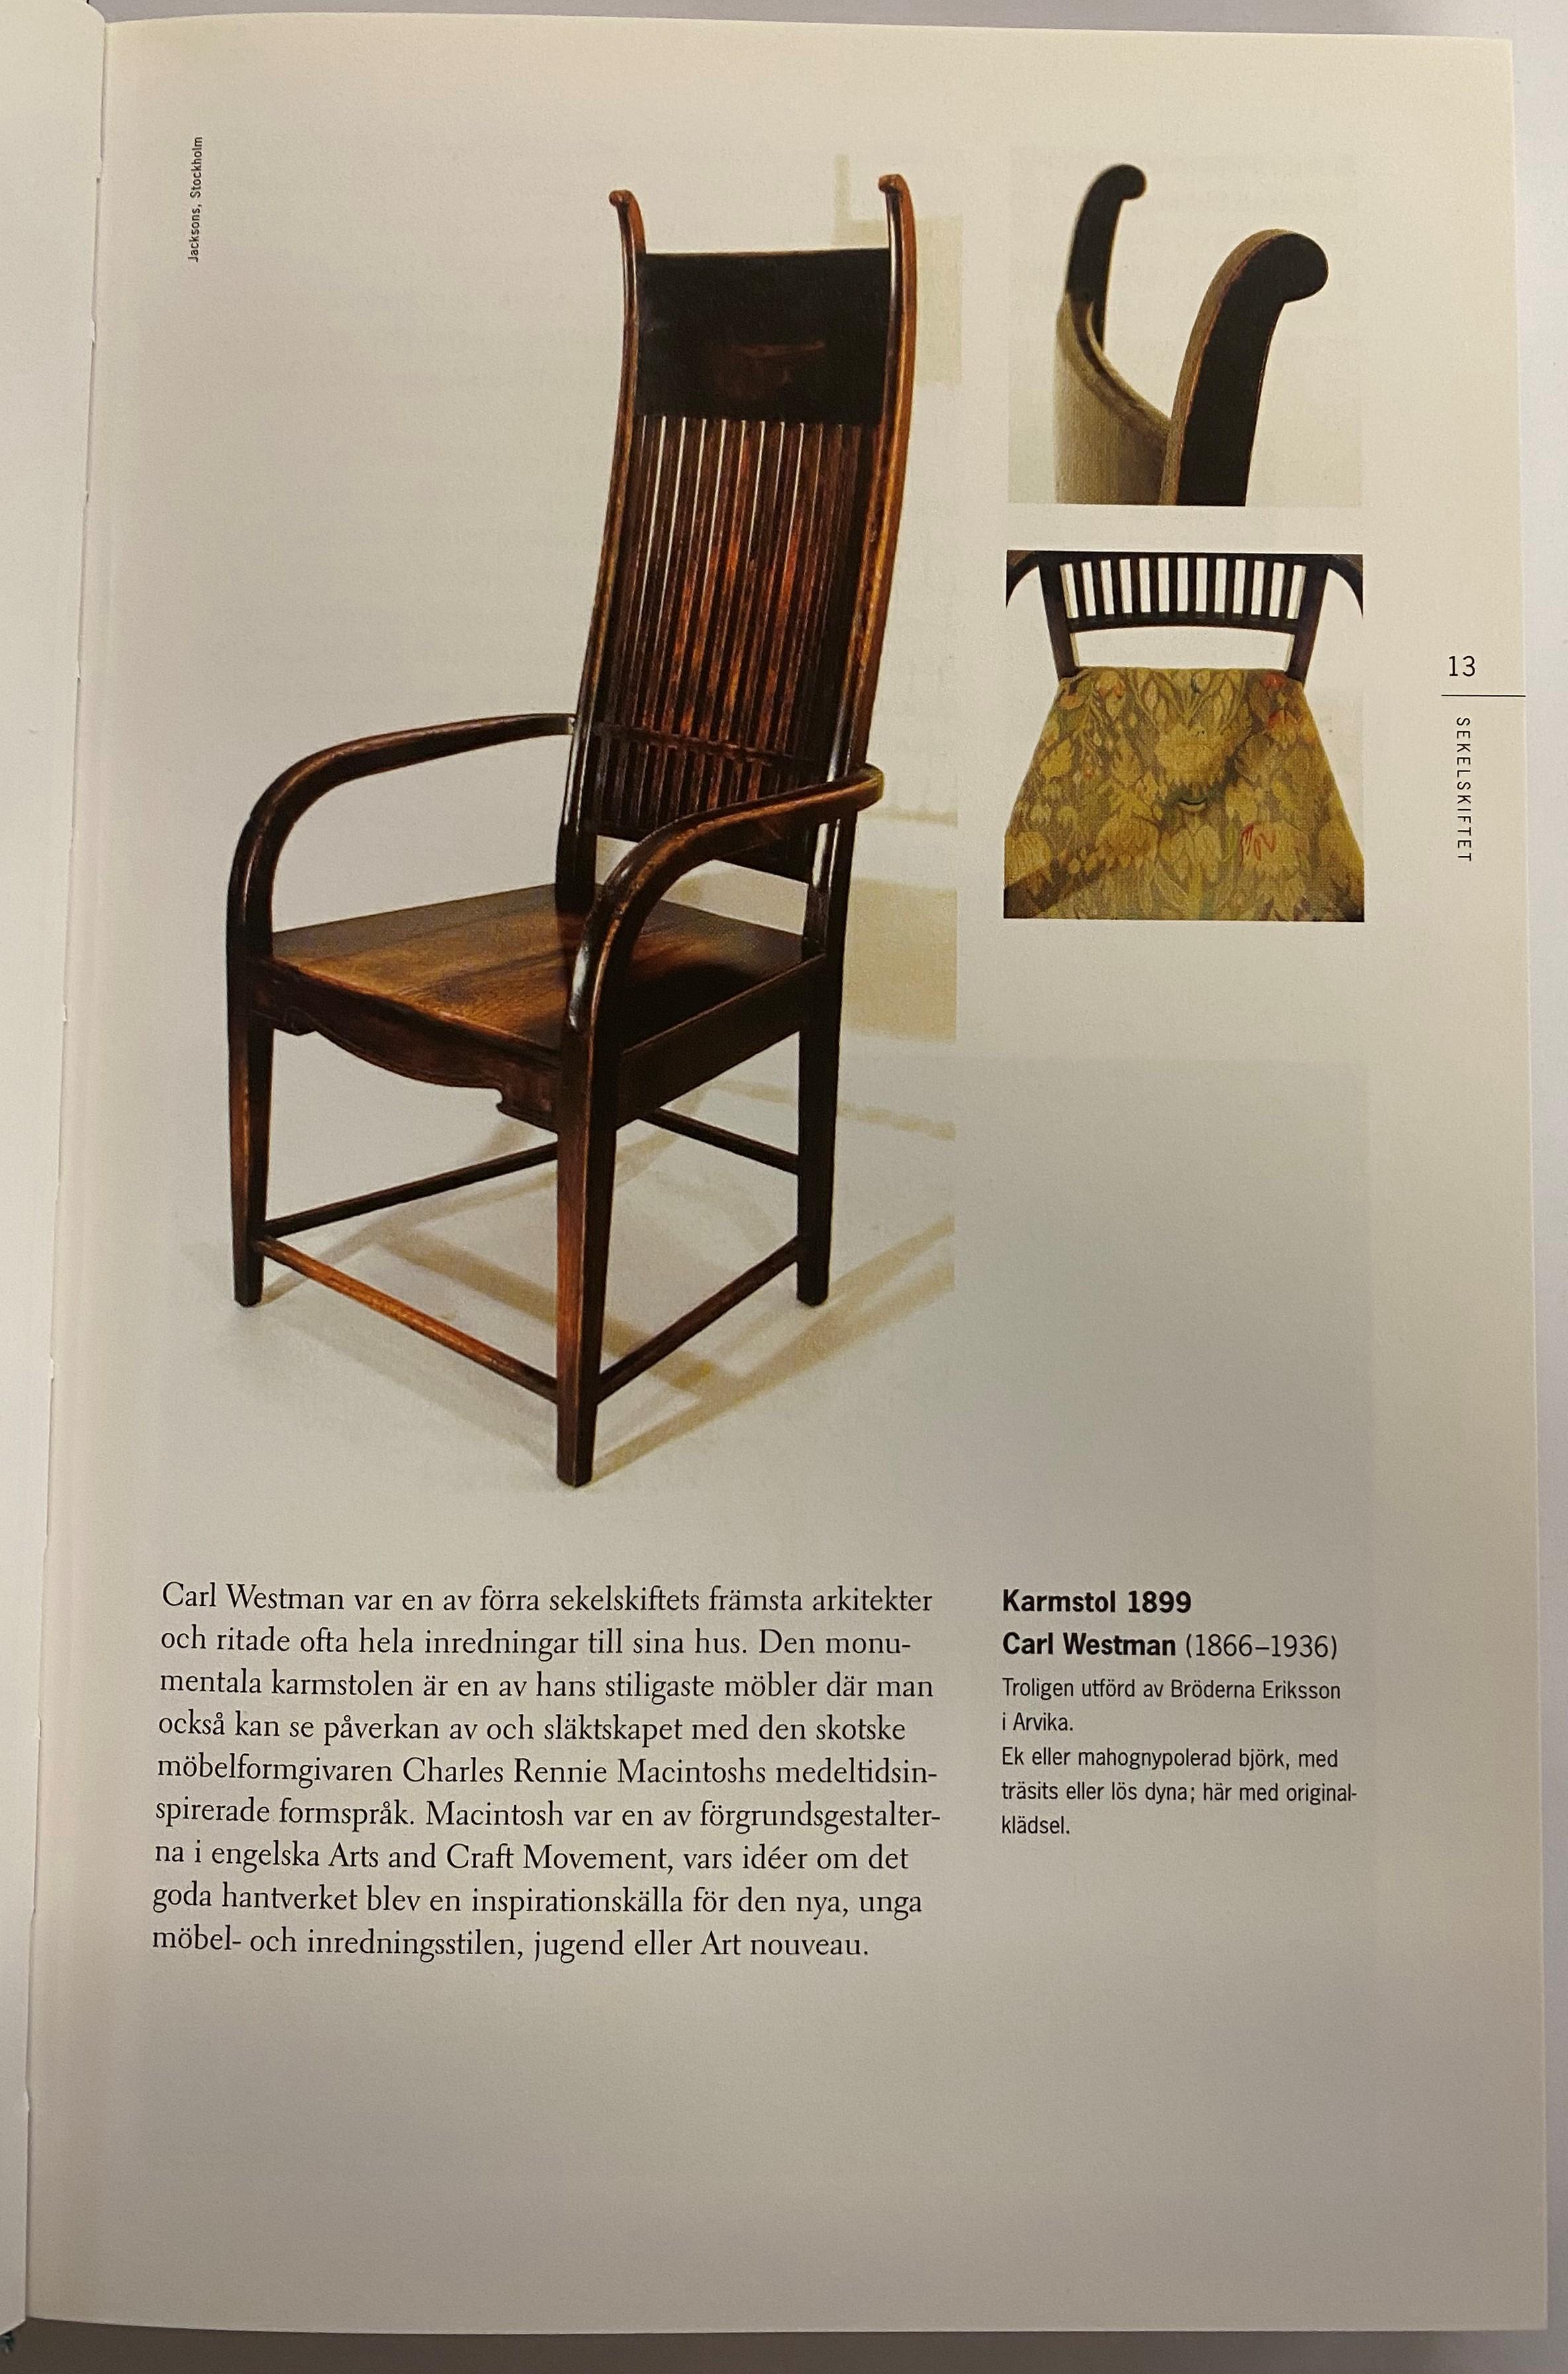 (Swedish Chairs and their Designers 1899-2001) 
The Modern overview of 20th century Swedish chairs, described by dan gordan, all presented in pictures with many new photographs by patrik johansson, who followed the author in search of seating